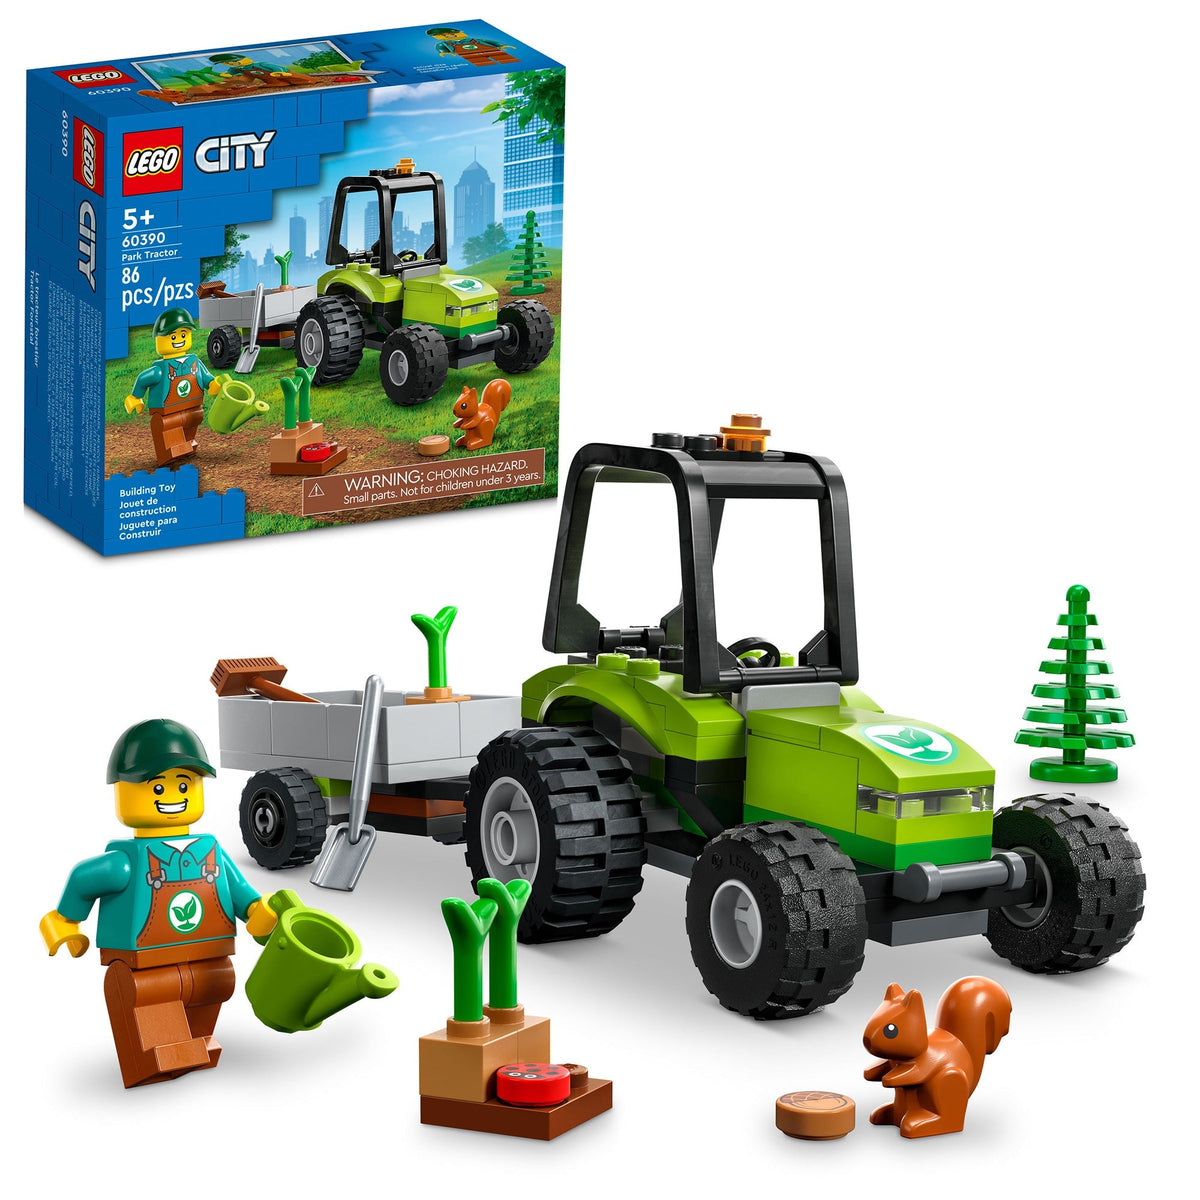 LEGO Toys & Games LEGO City Park Tractor, 60390, Ages 5+, 86 Pieces 673419375221